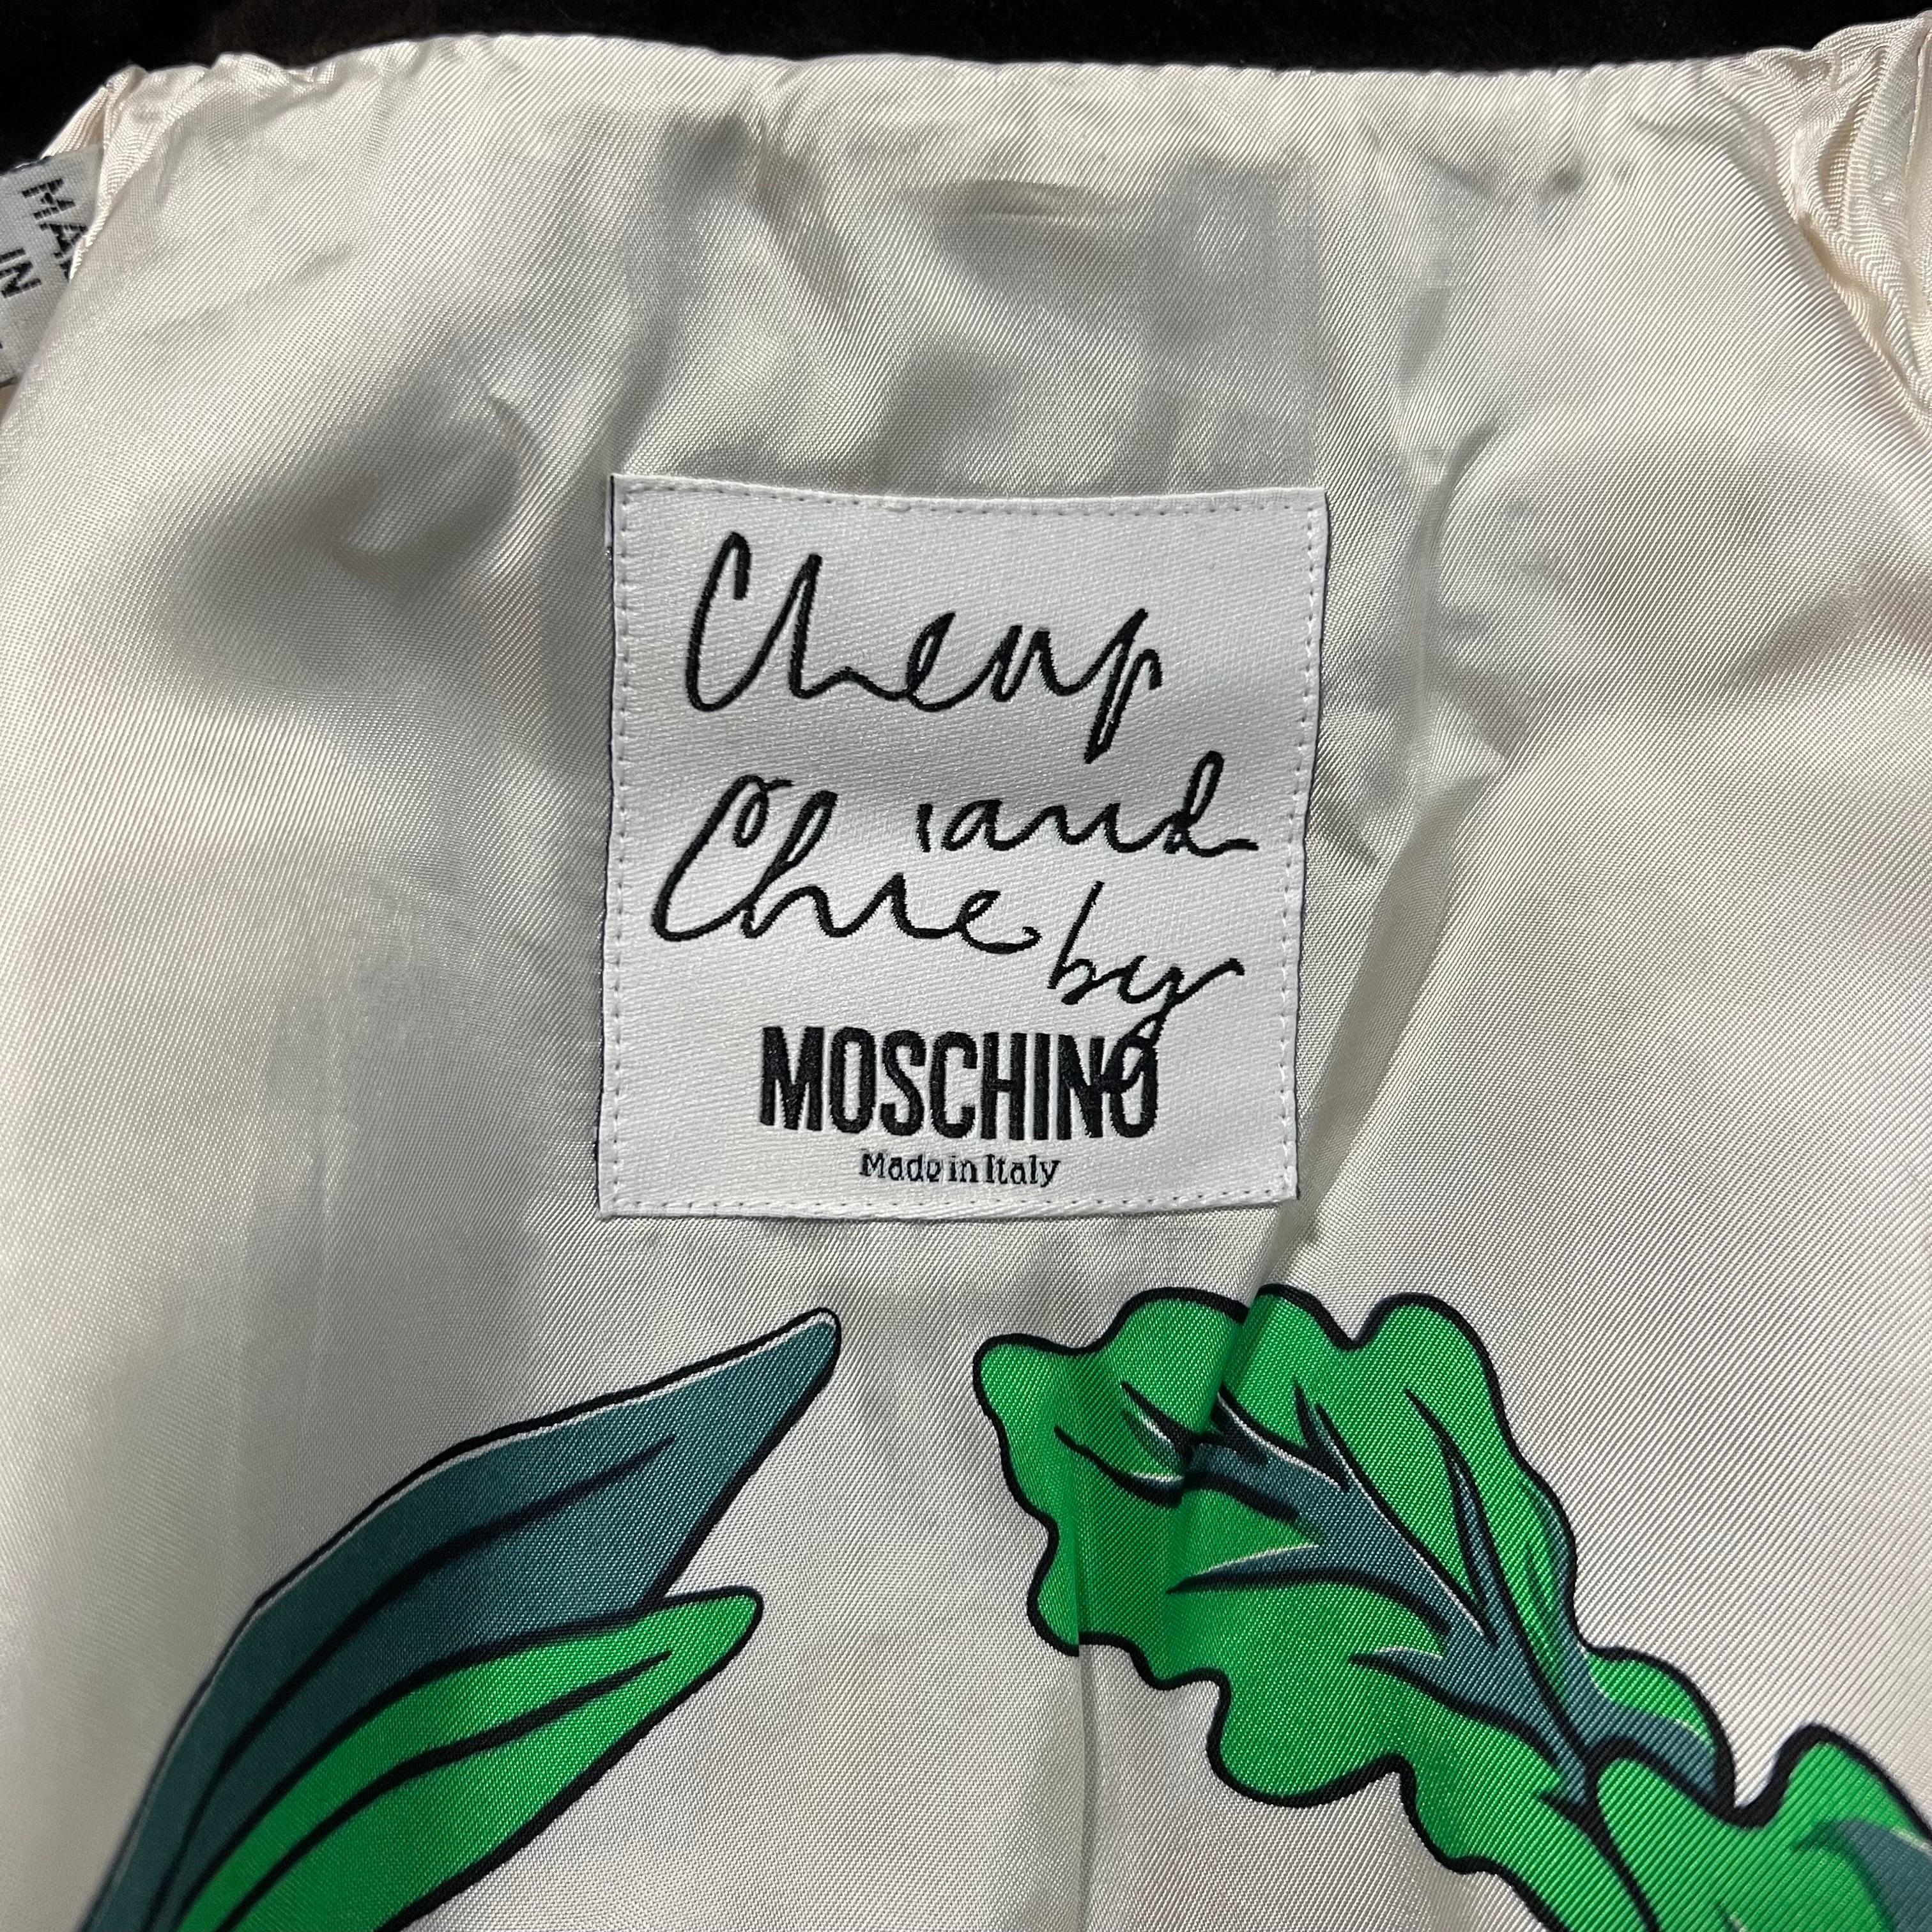 Moschino Cheap & Chic Vintage Vegetable Jacket as seen on the Nanny 6